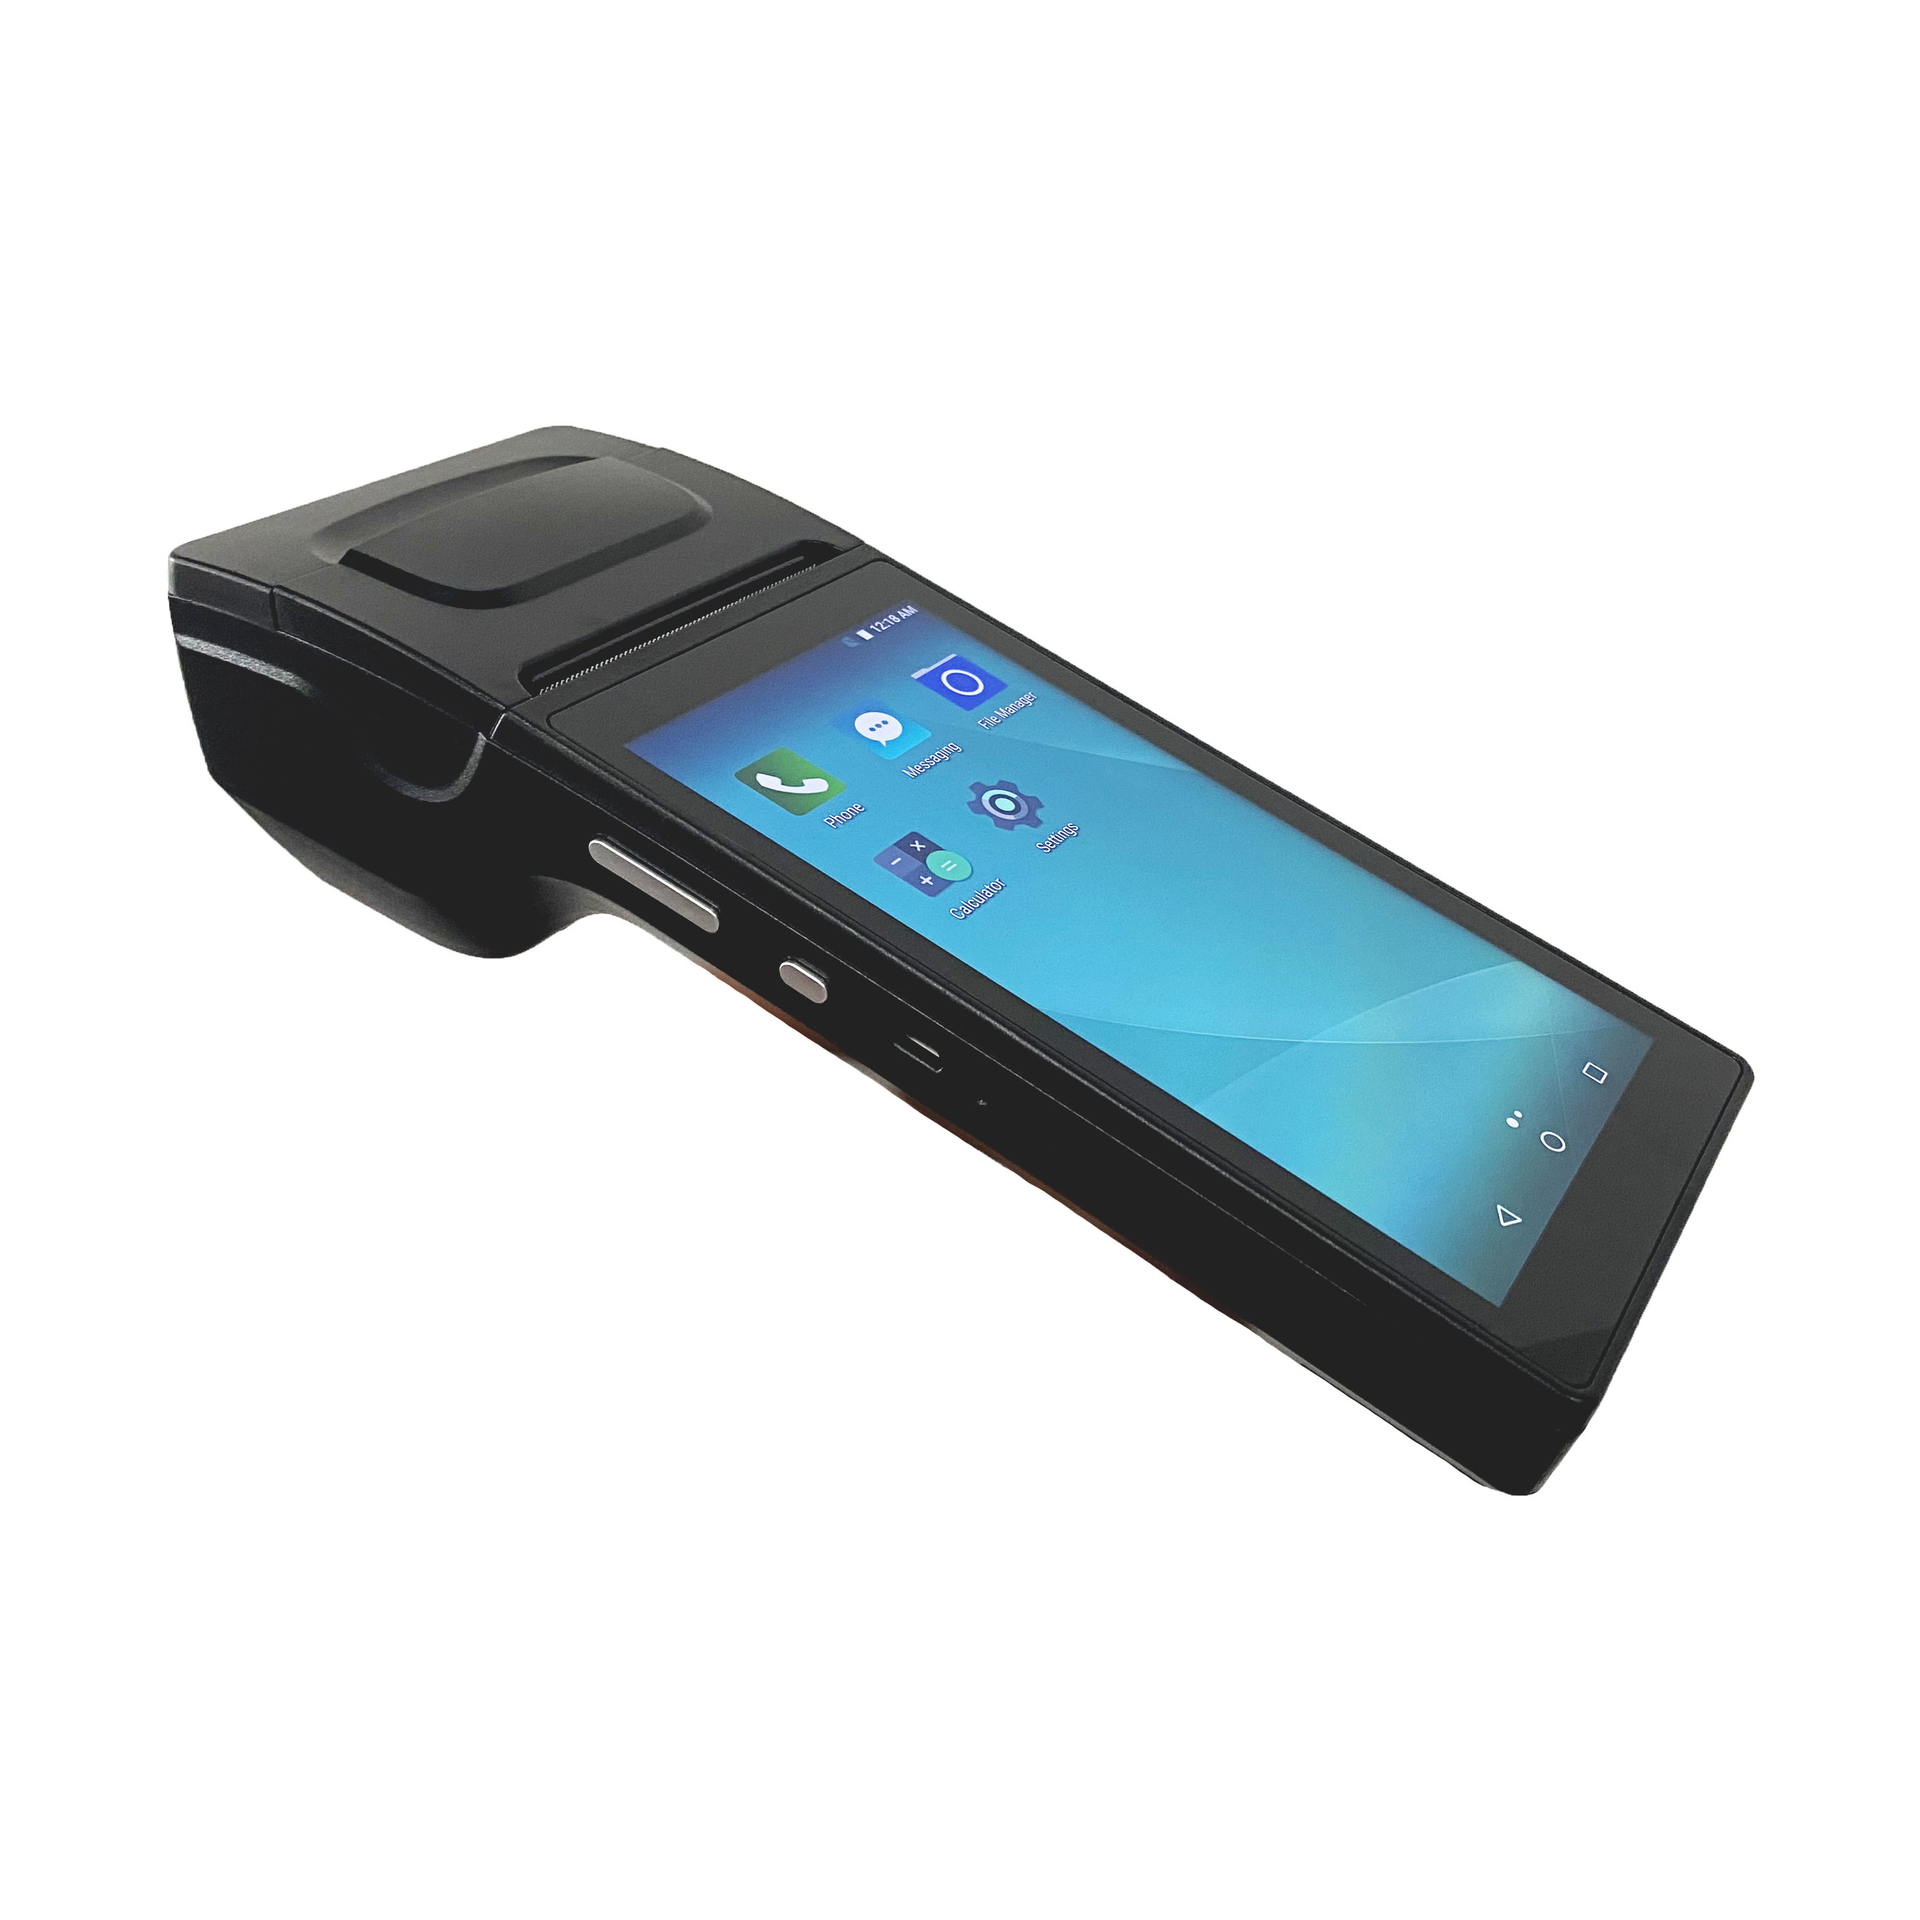 Restaurant Online Food Ordering Handheld Android Pos Terminal with Printer